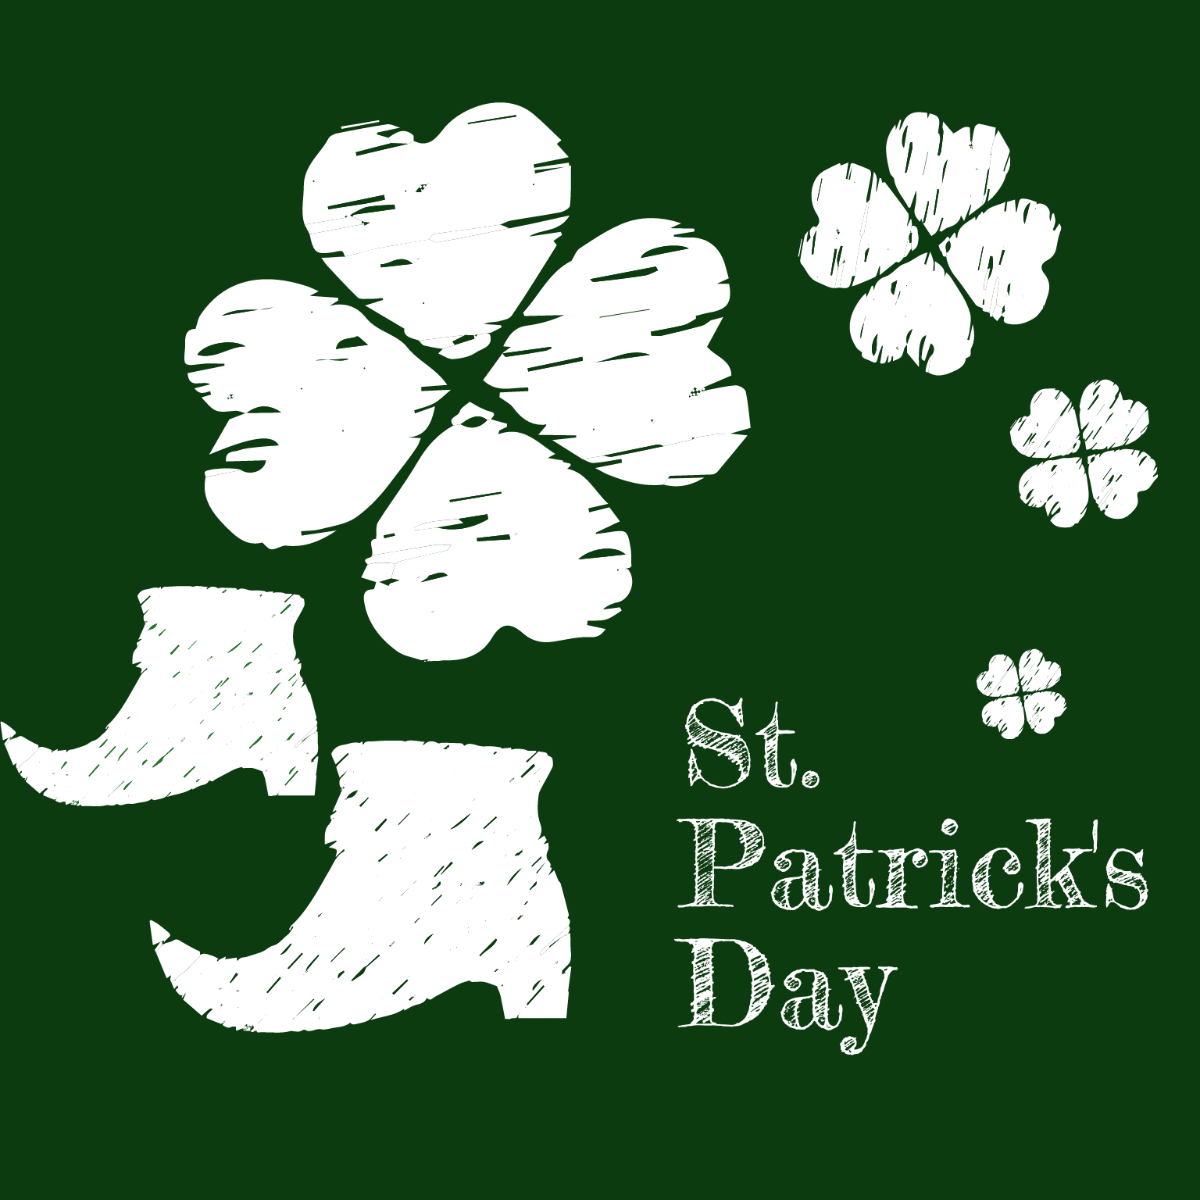 St. Patrick's Day Chalk Design Vector Template